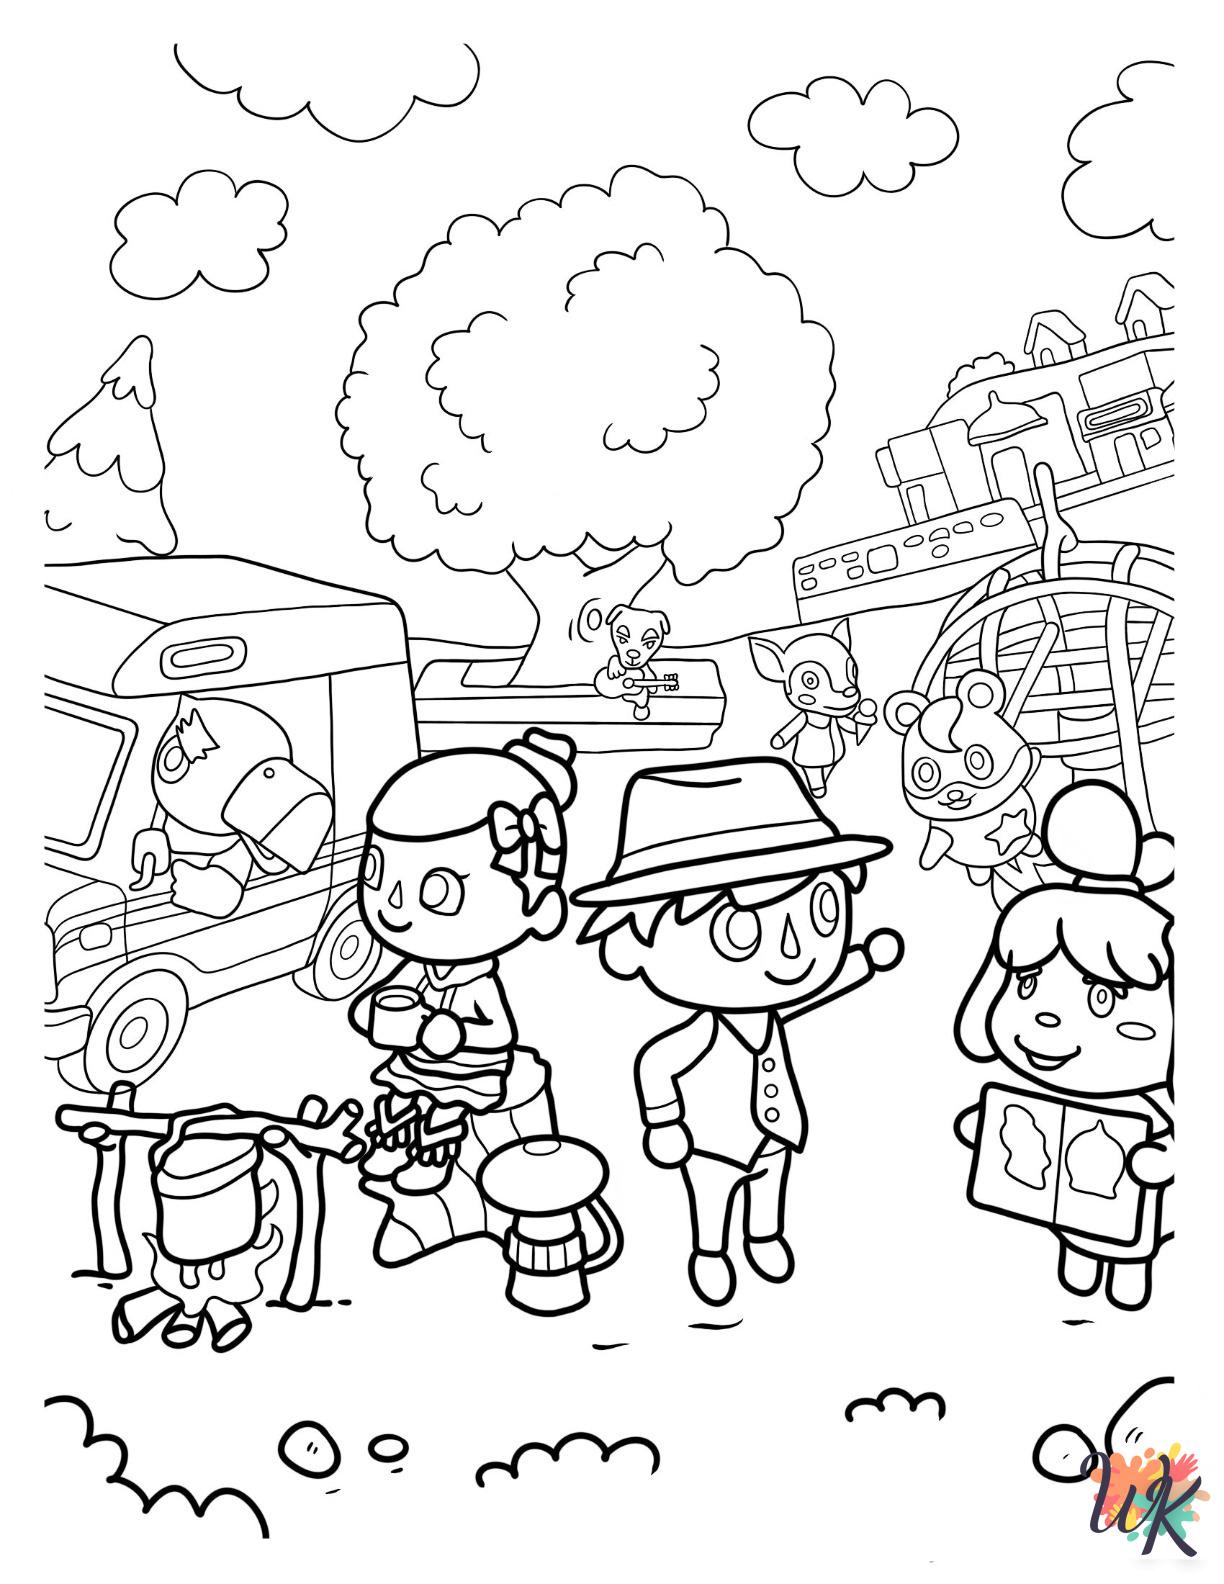 Animal Crossing coloring pages easy